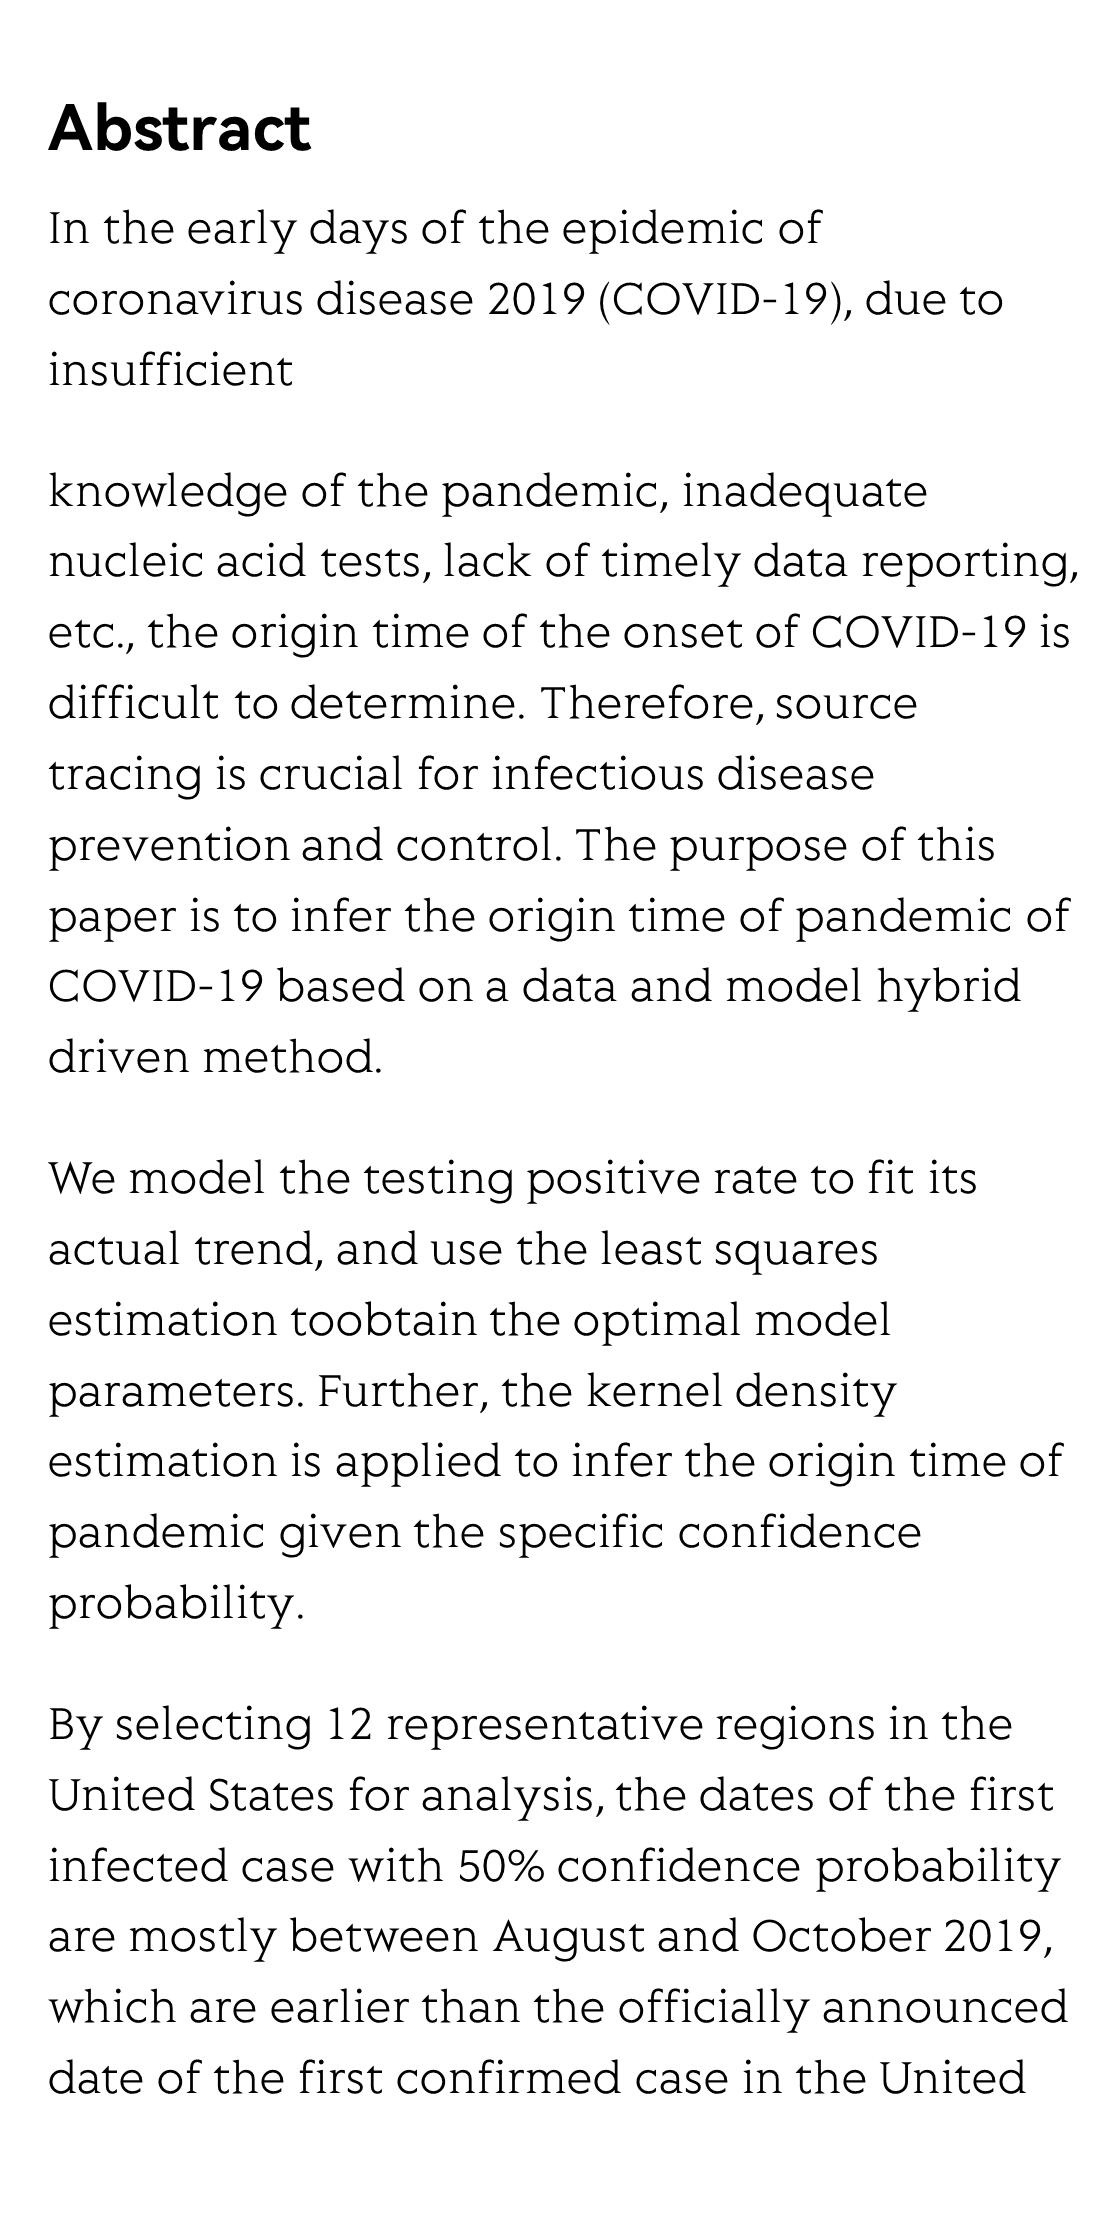 Dating the First Case of COVID-19 Epidemic from a Probabilistic Perspective_2